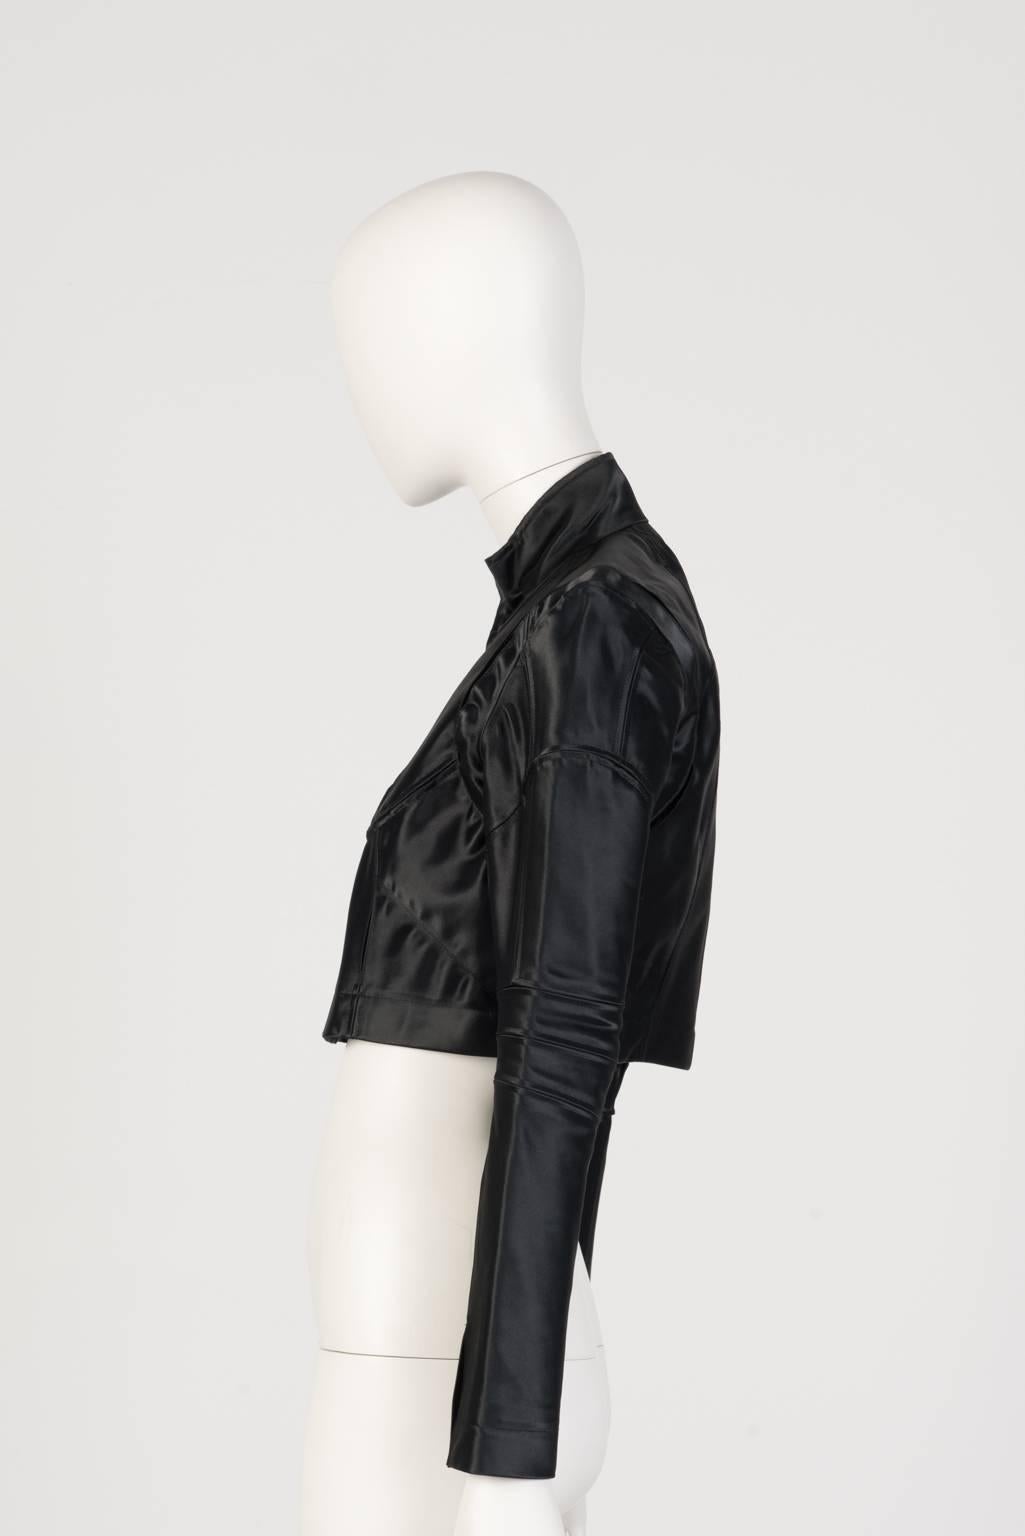 Comme Des Garçons Constructed jacket In New Condition For Sale In Xiamen, Fujian